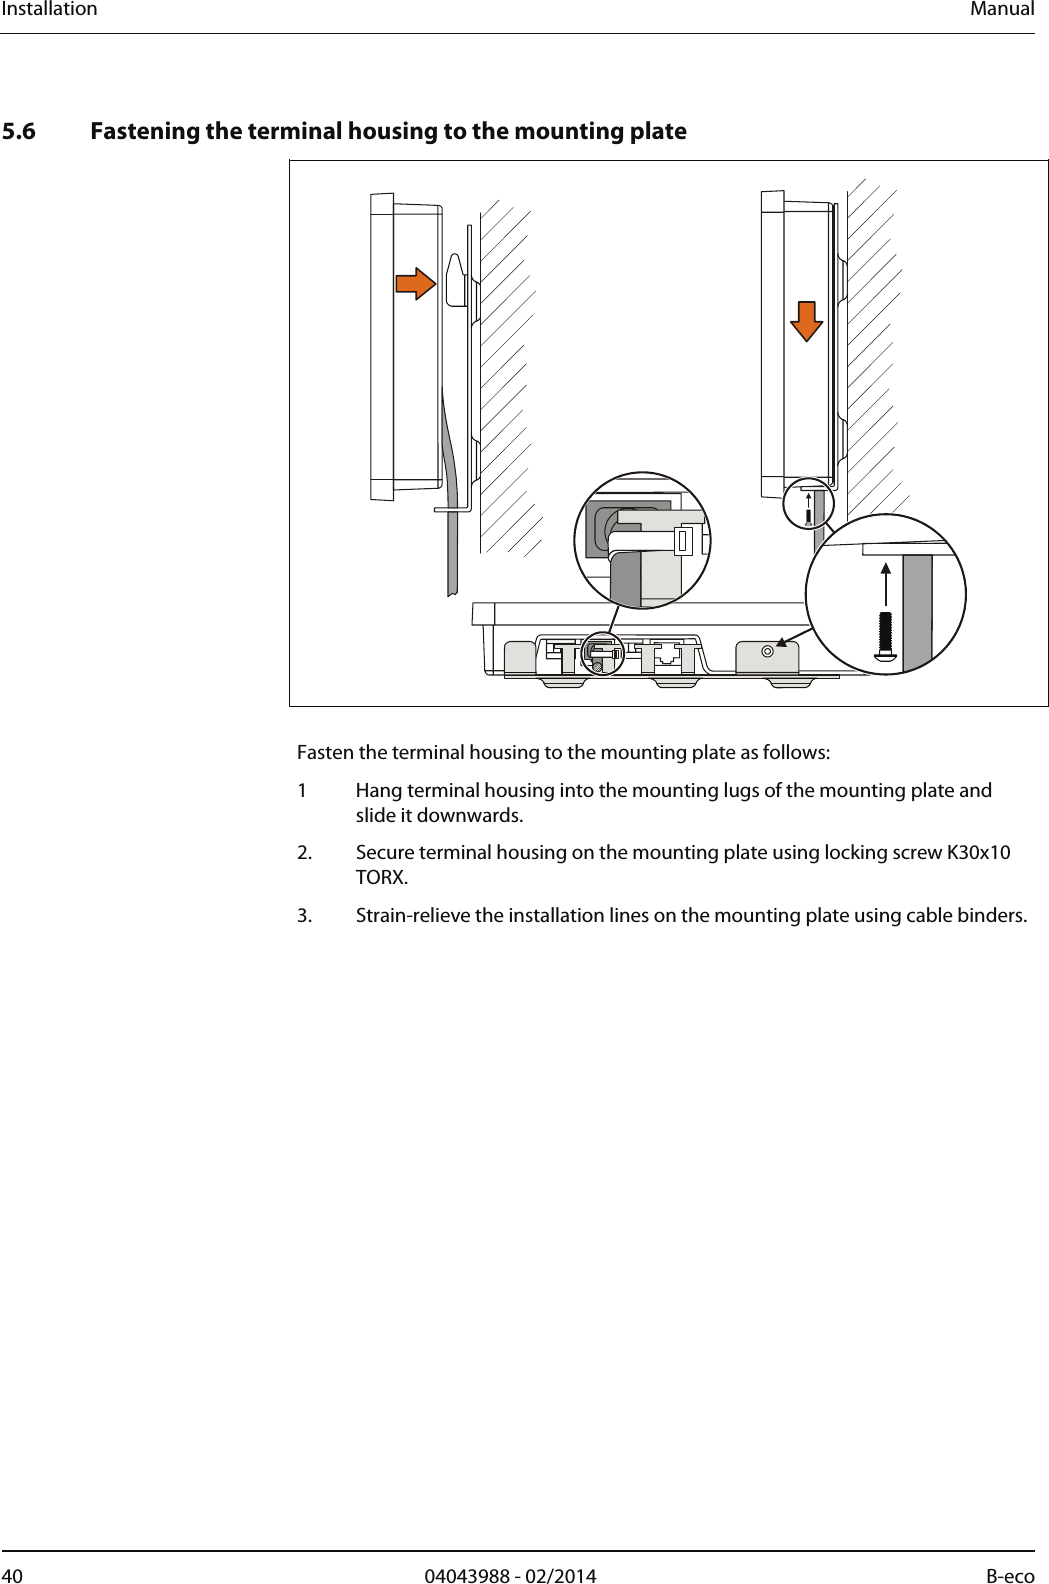 Installation  Manual 40  04043988 - 02/2014  B-eco     5.6 Fastening the terminal housing to the mounting plate     Fasten the terminal housing to the mounting plate as follows: 1 Hang terminal housing into the mounting lugs of the mounting plate and slide it downwards. 2. Secure terminal housing on the mounting plate using locking screw K30x10 TORX. 3. Strain-relieve the installation lines on the mounting plate using cable binders. 